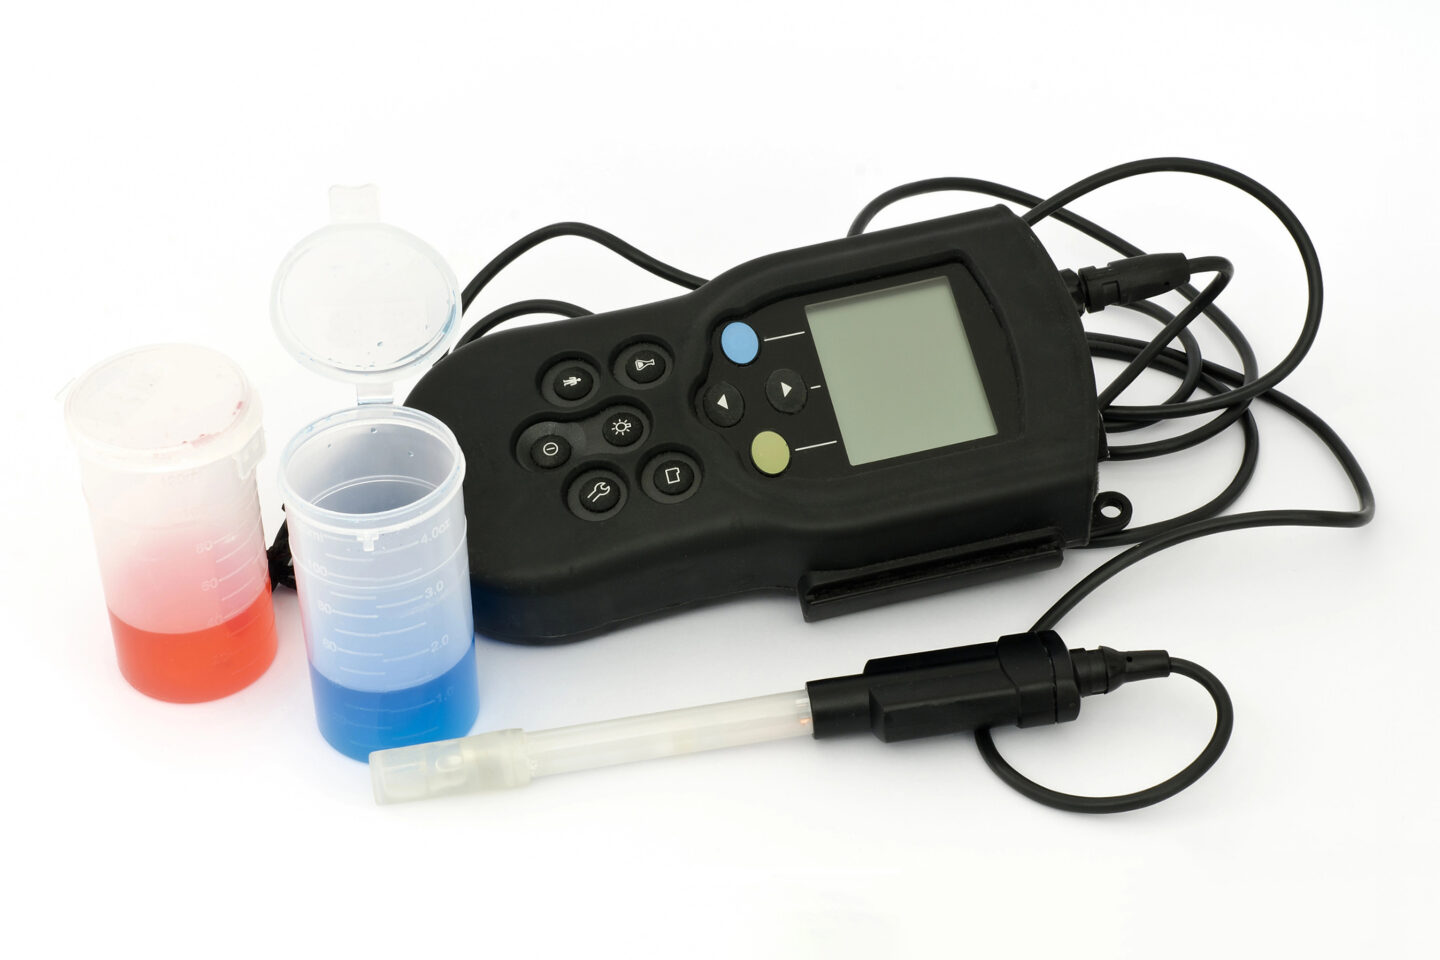 ph meter with electrodes for testing liquids